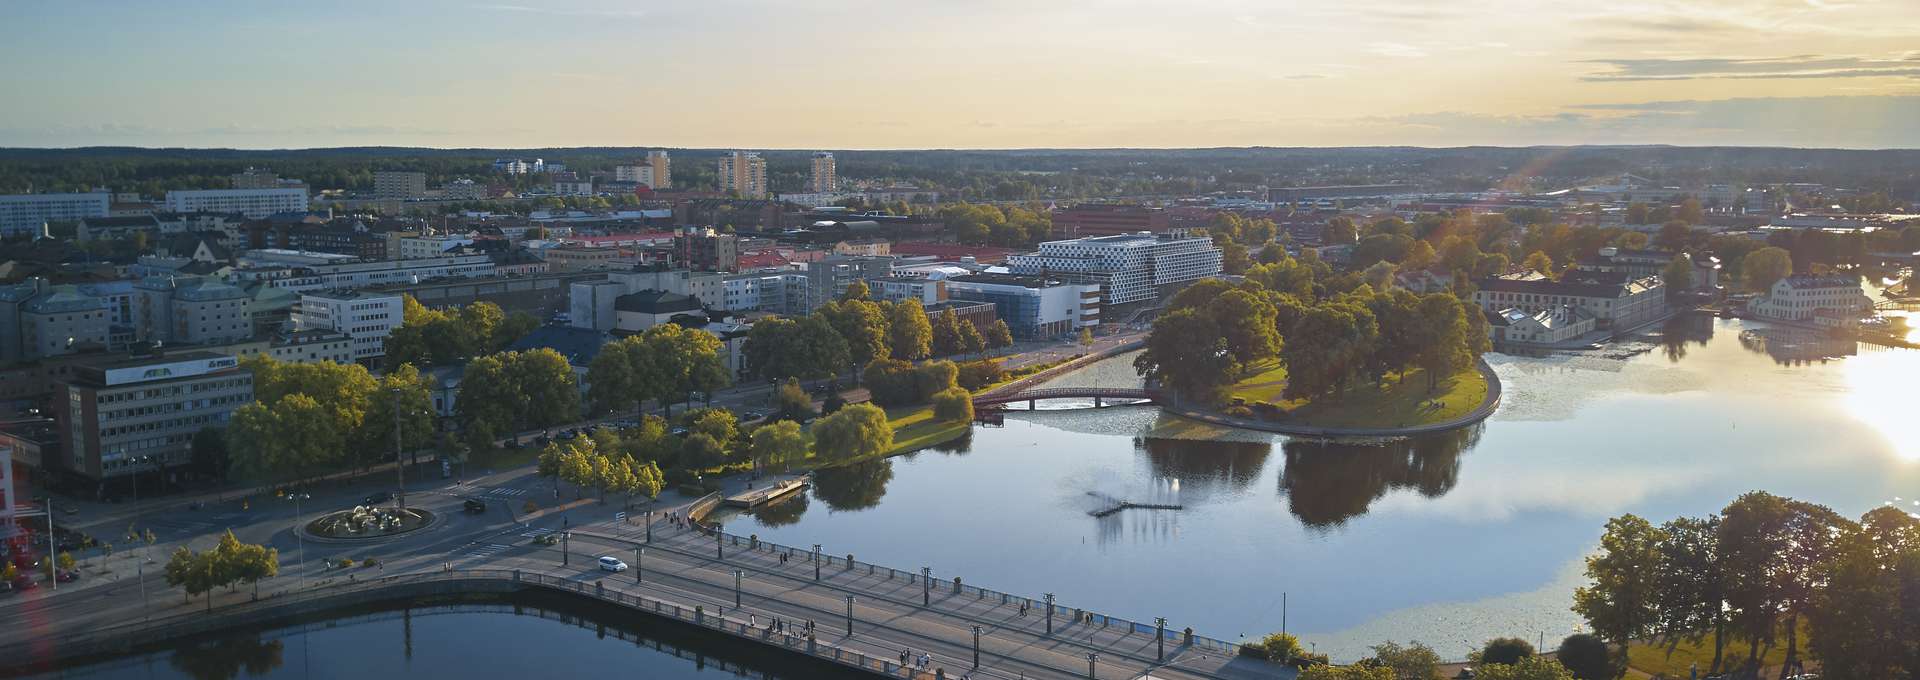 Aerial view of Eskilstuna at sunset showing the cityscape, rivers, and bridges.n univerity and greenery